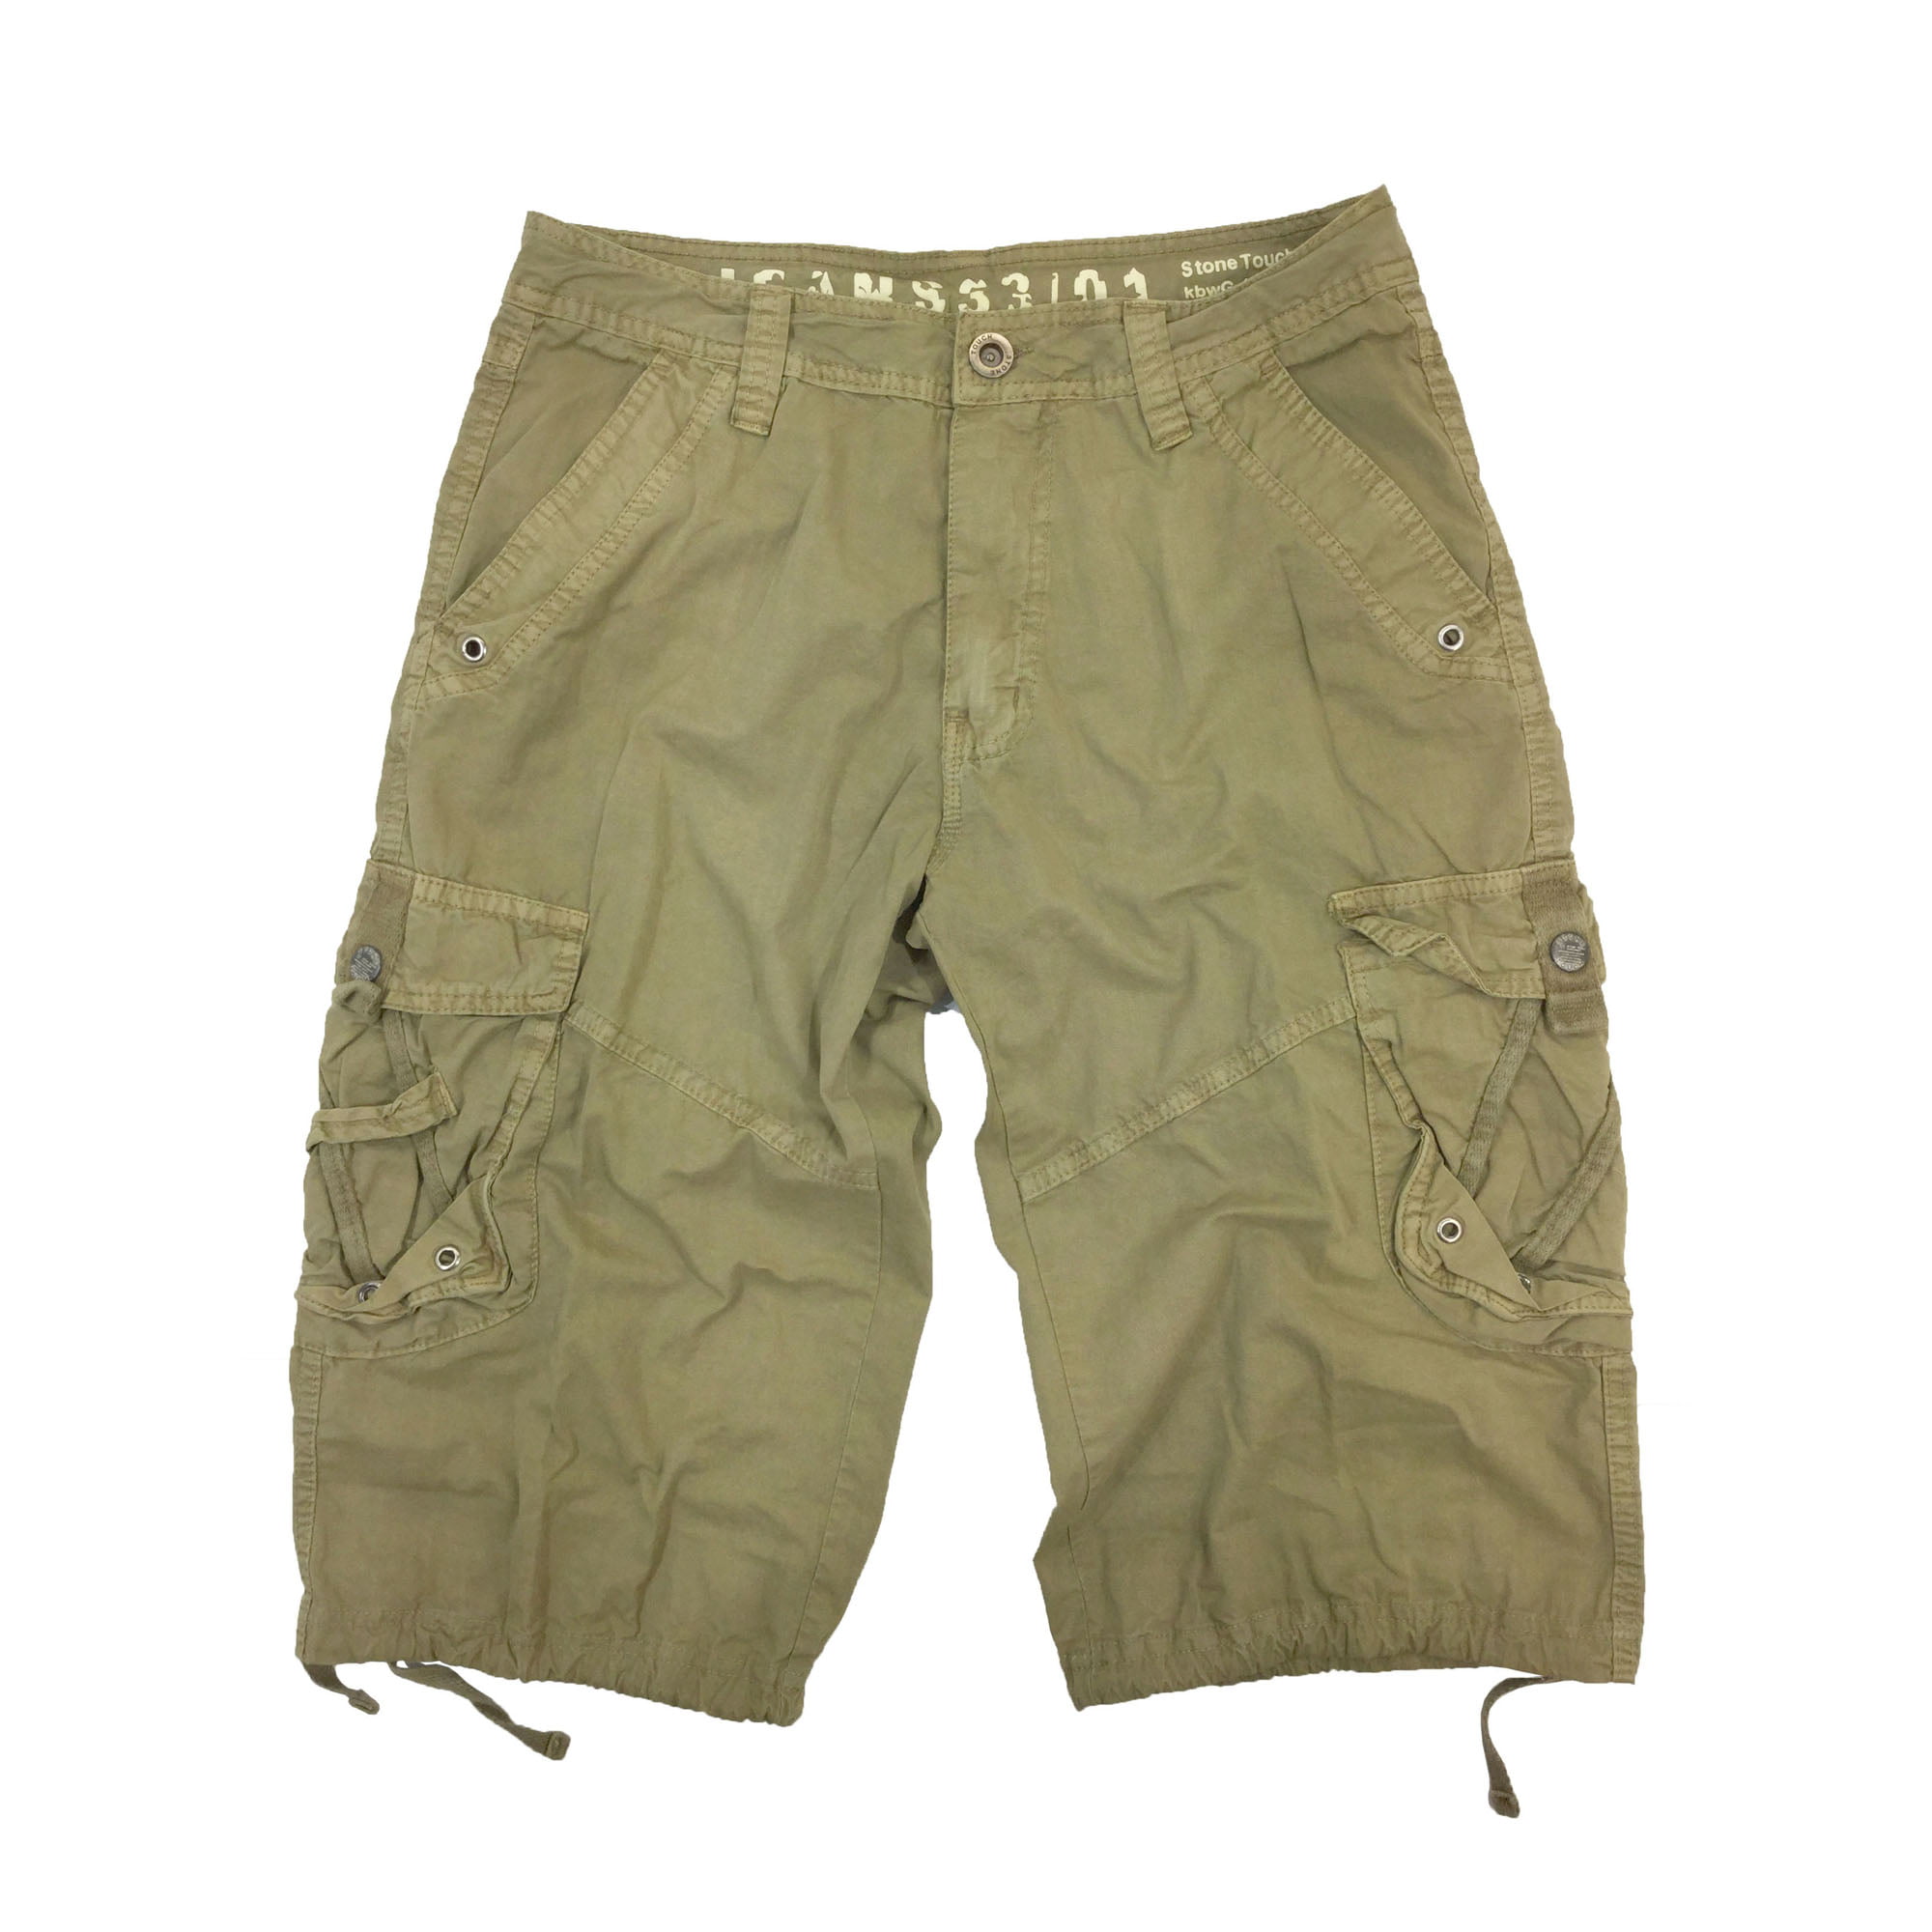 Mens Military Khaki Cargo Shorts 15 inches inseam #A7S Size 34 ...